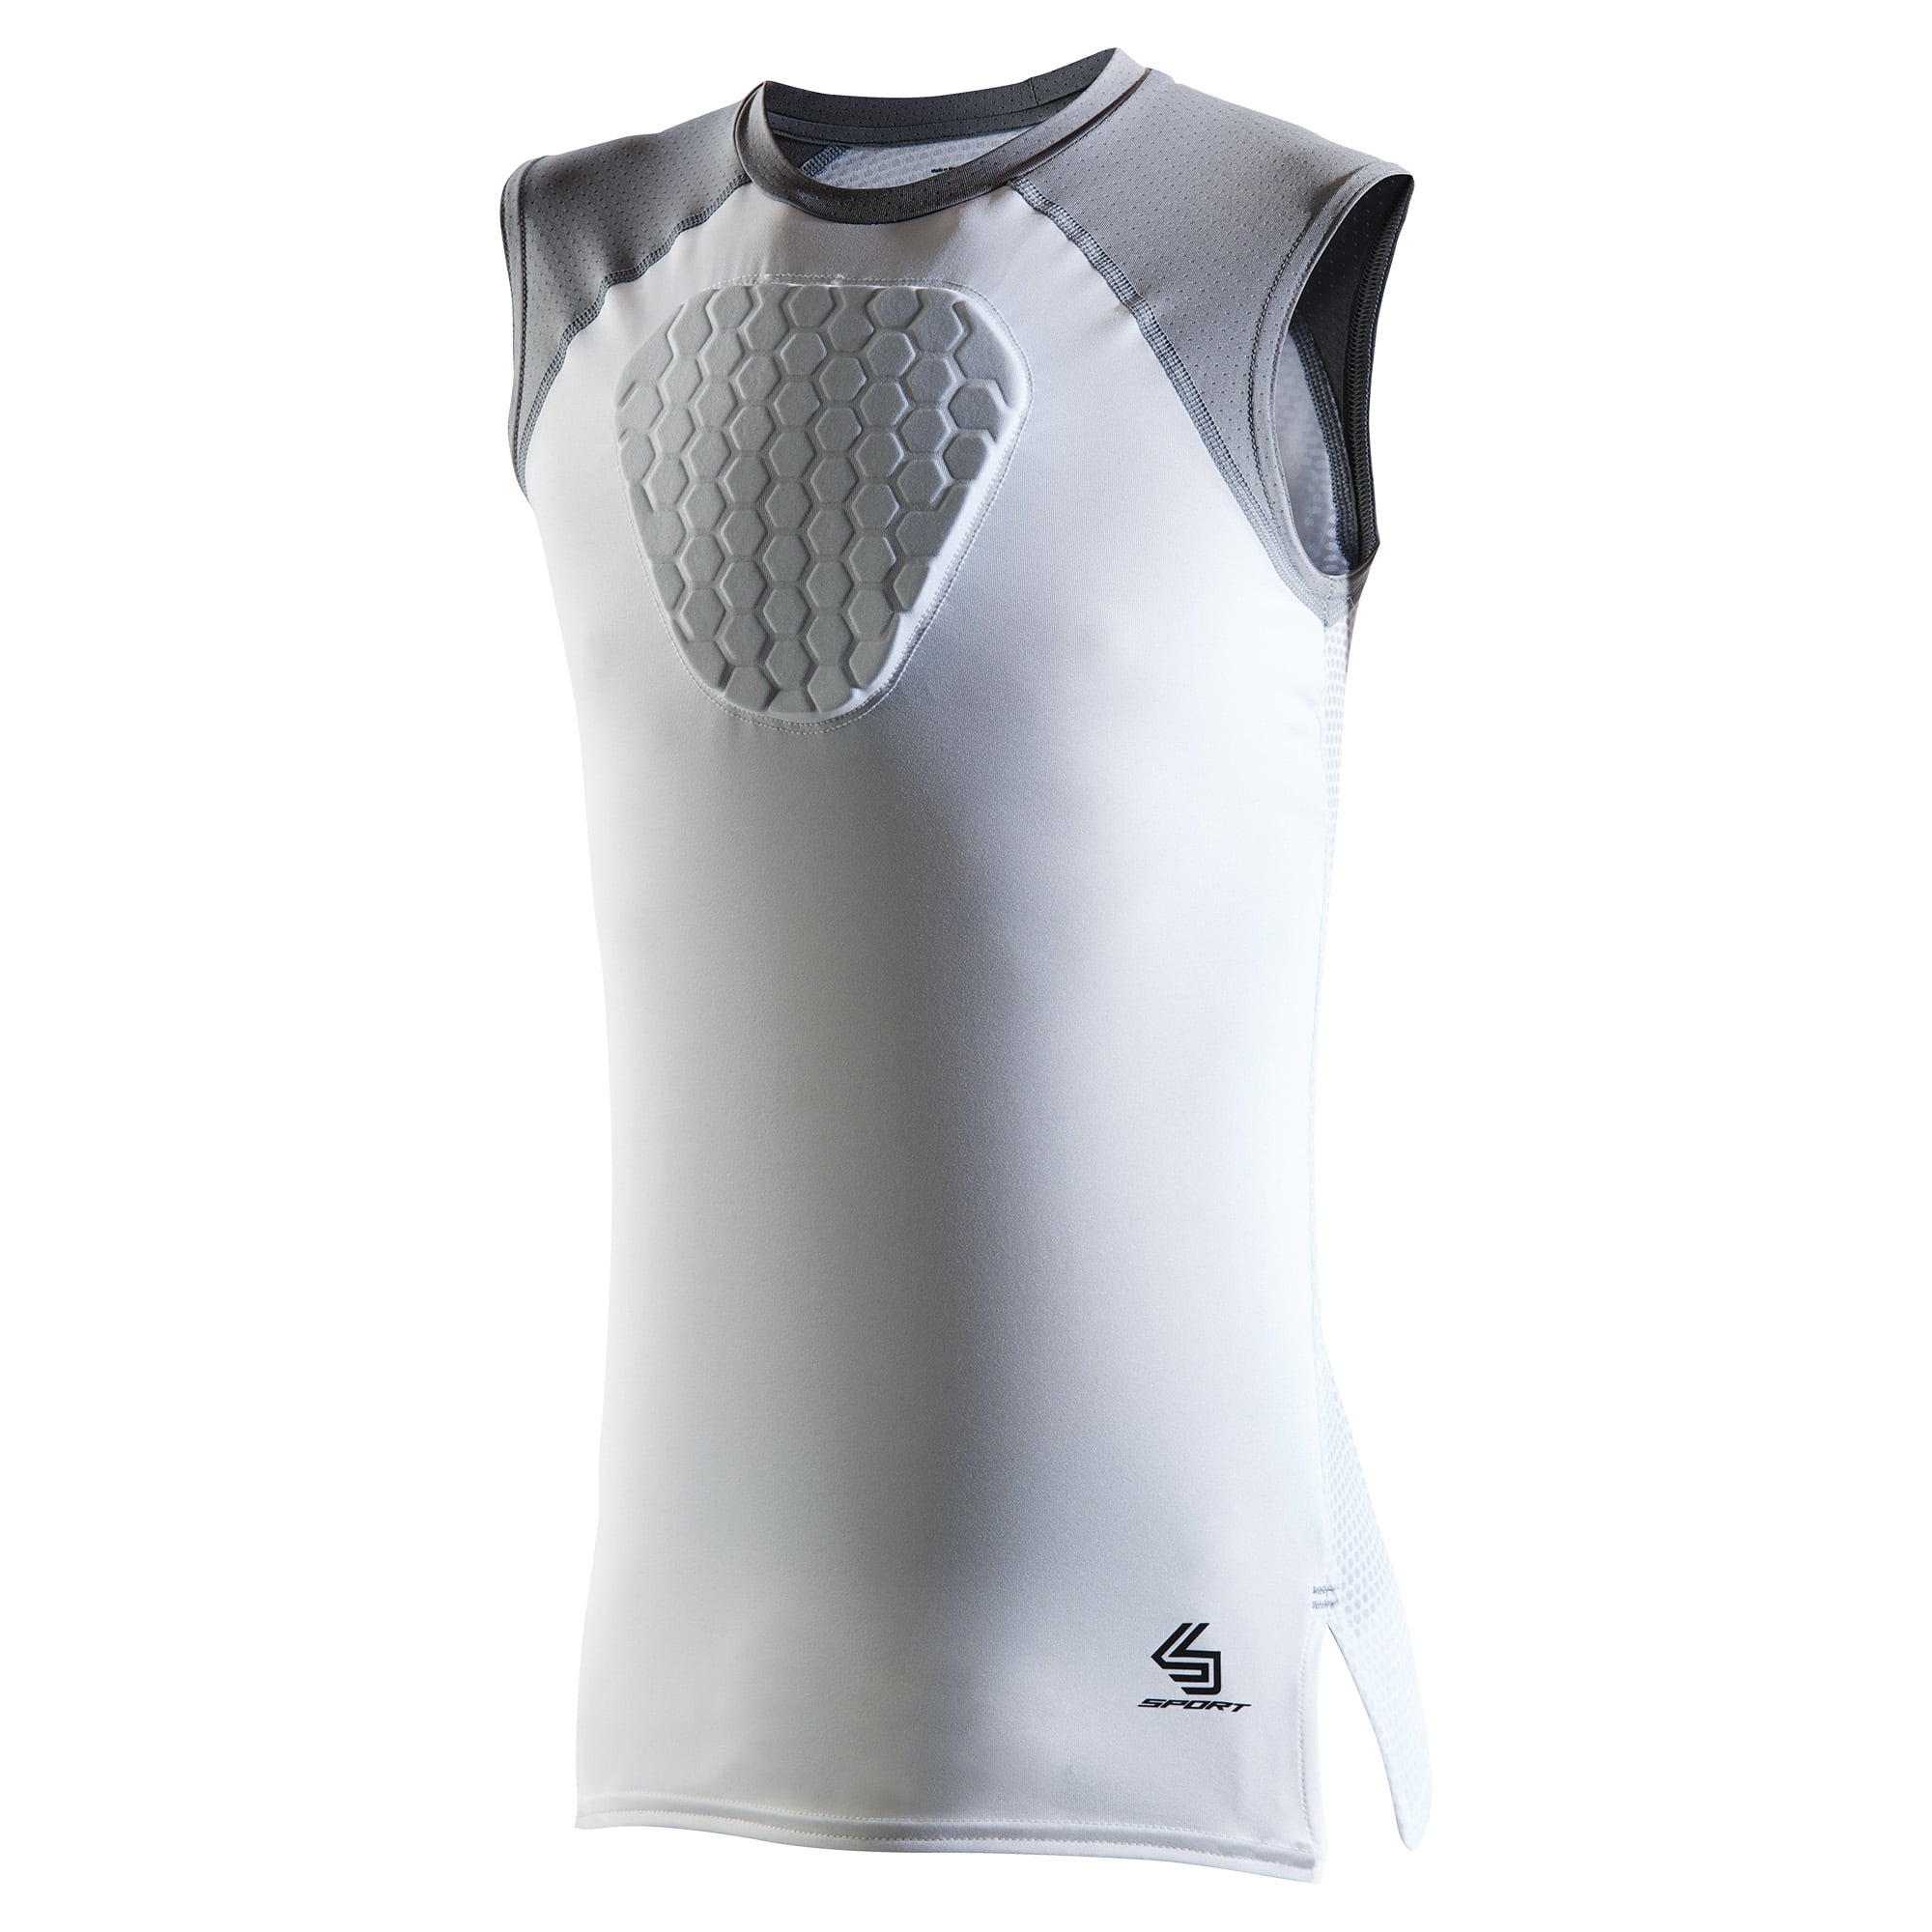 YOUTH PADDED SHIRT Chest Shoulder Collarbone Recoil PROTECTIVE Sports Gear 